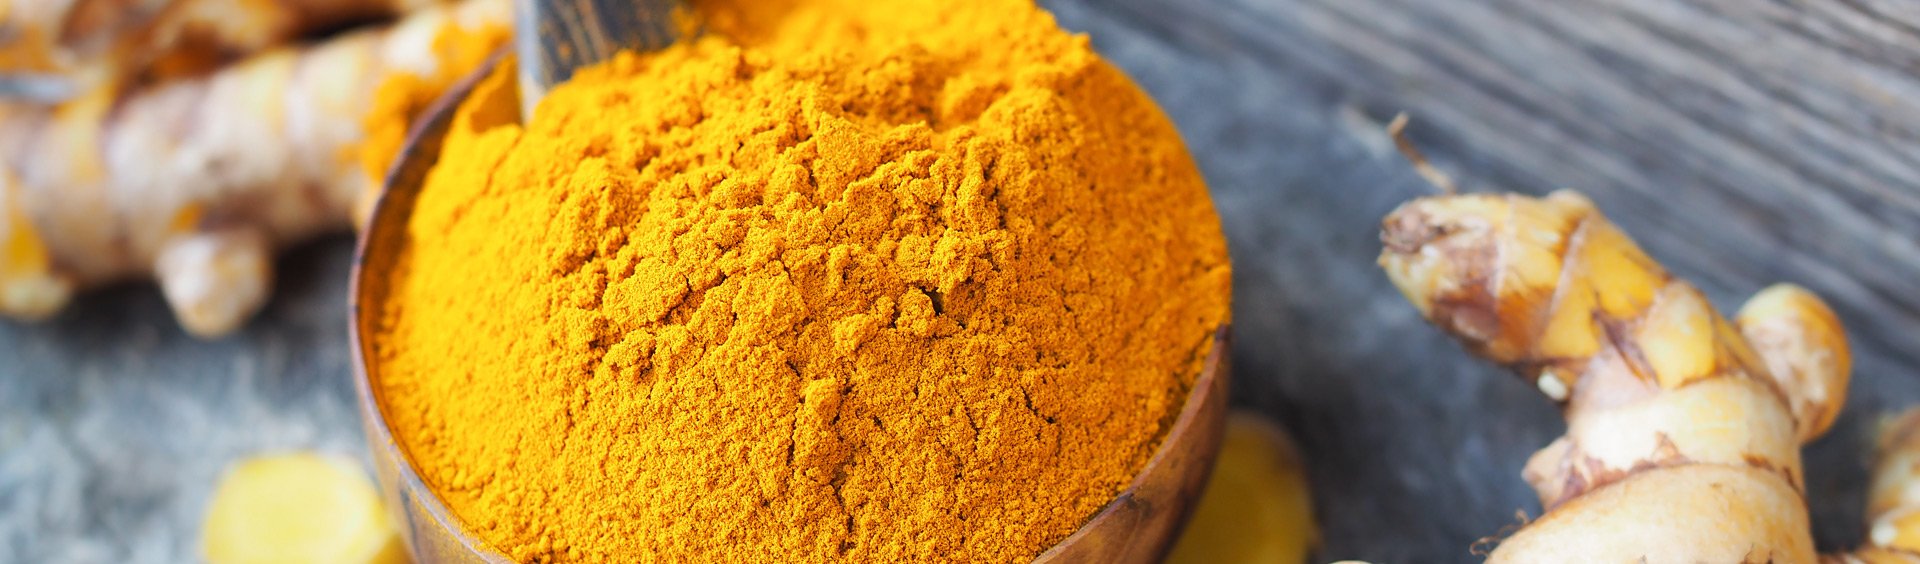 Using Black Pepper to Enhance the Anti-Inflammatory Effects of Turmeric